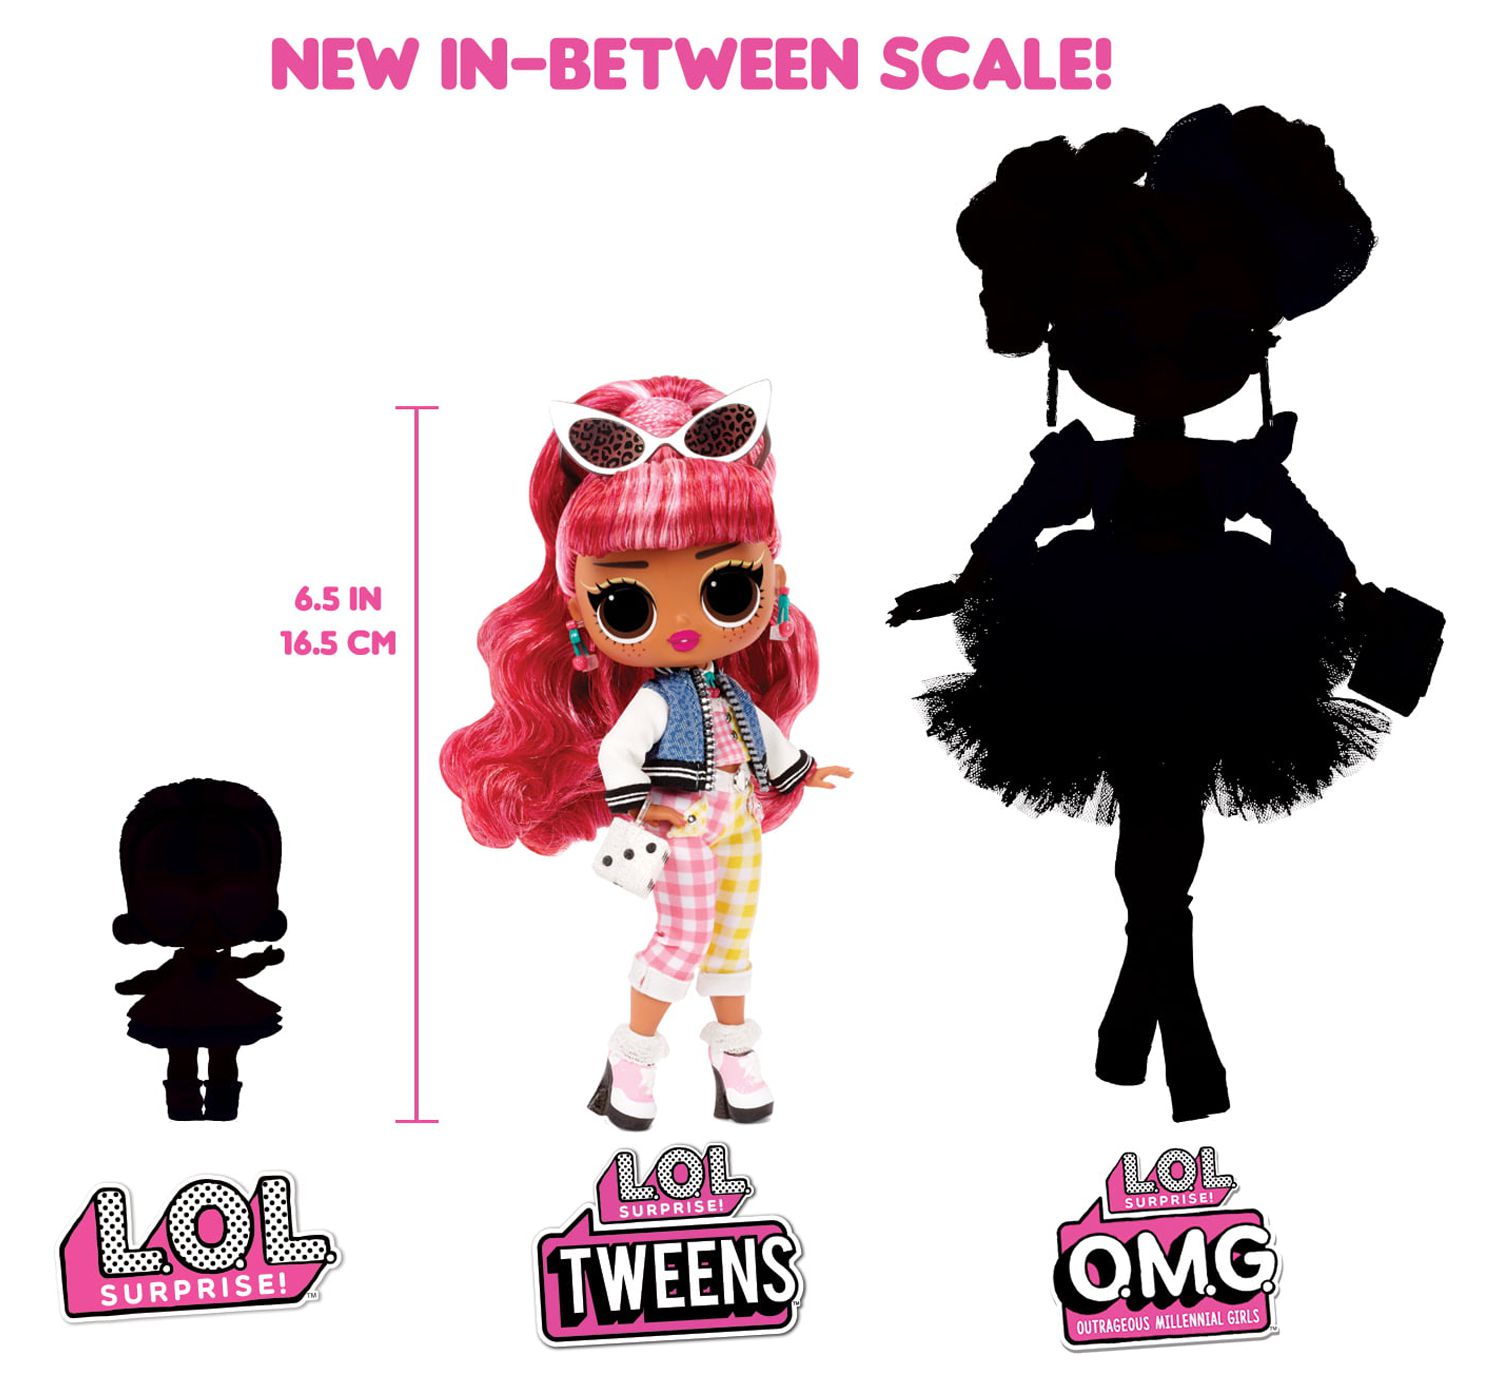 LOL Surprise Tweens Fashion Doll Cherry BB With 15 Surprises, Great Gift for Kids Ages 4 5 6+ - image 4 of 8